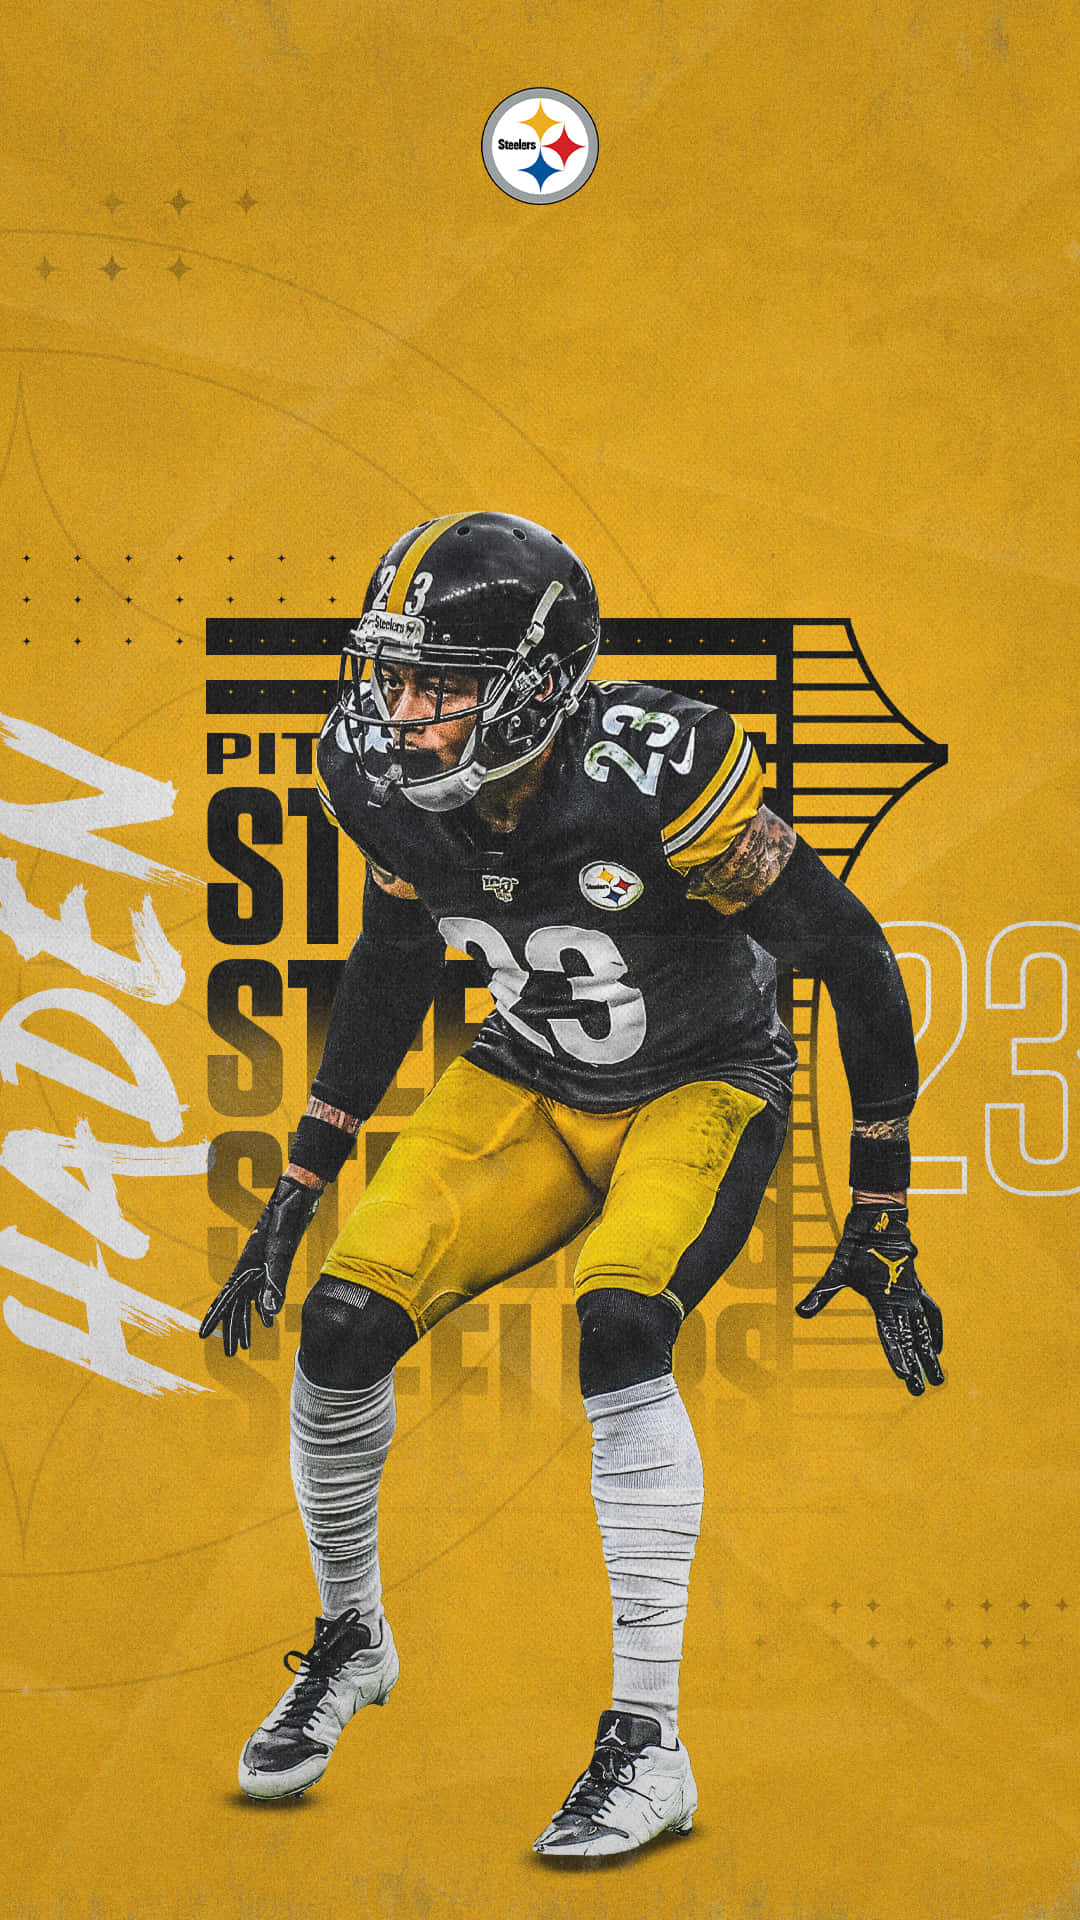 Papelde Parede Dos Steelers